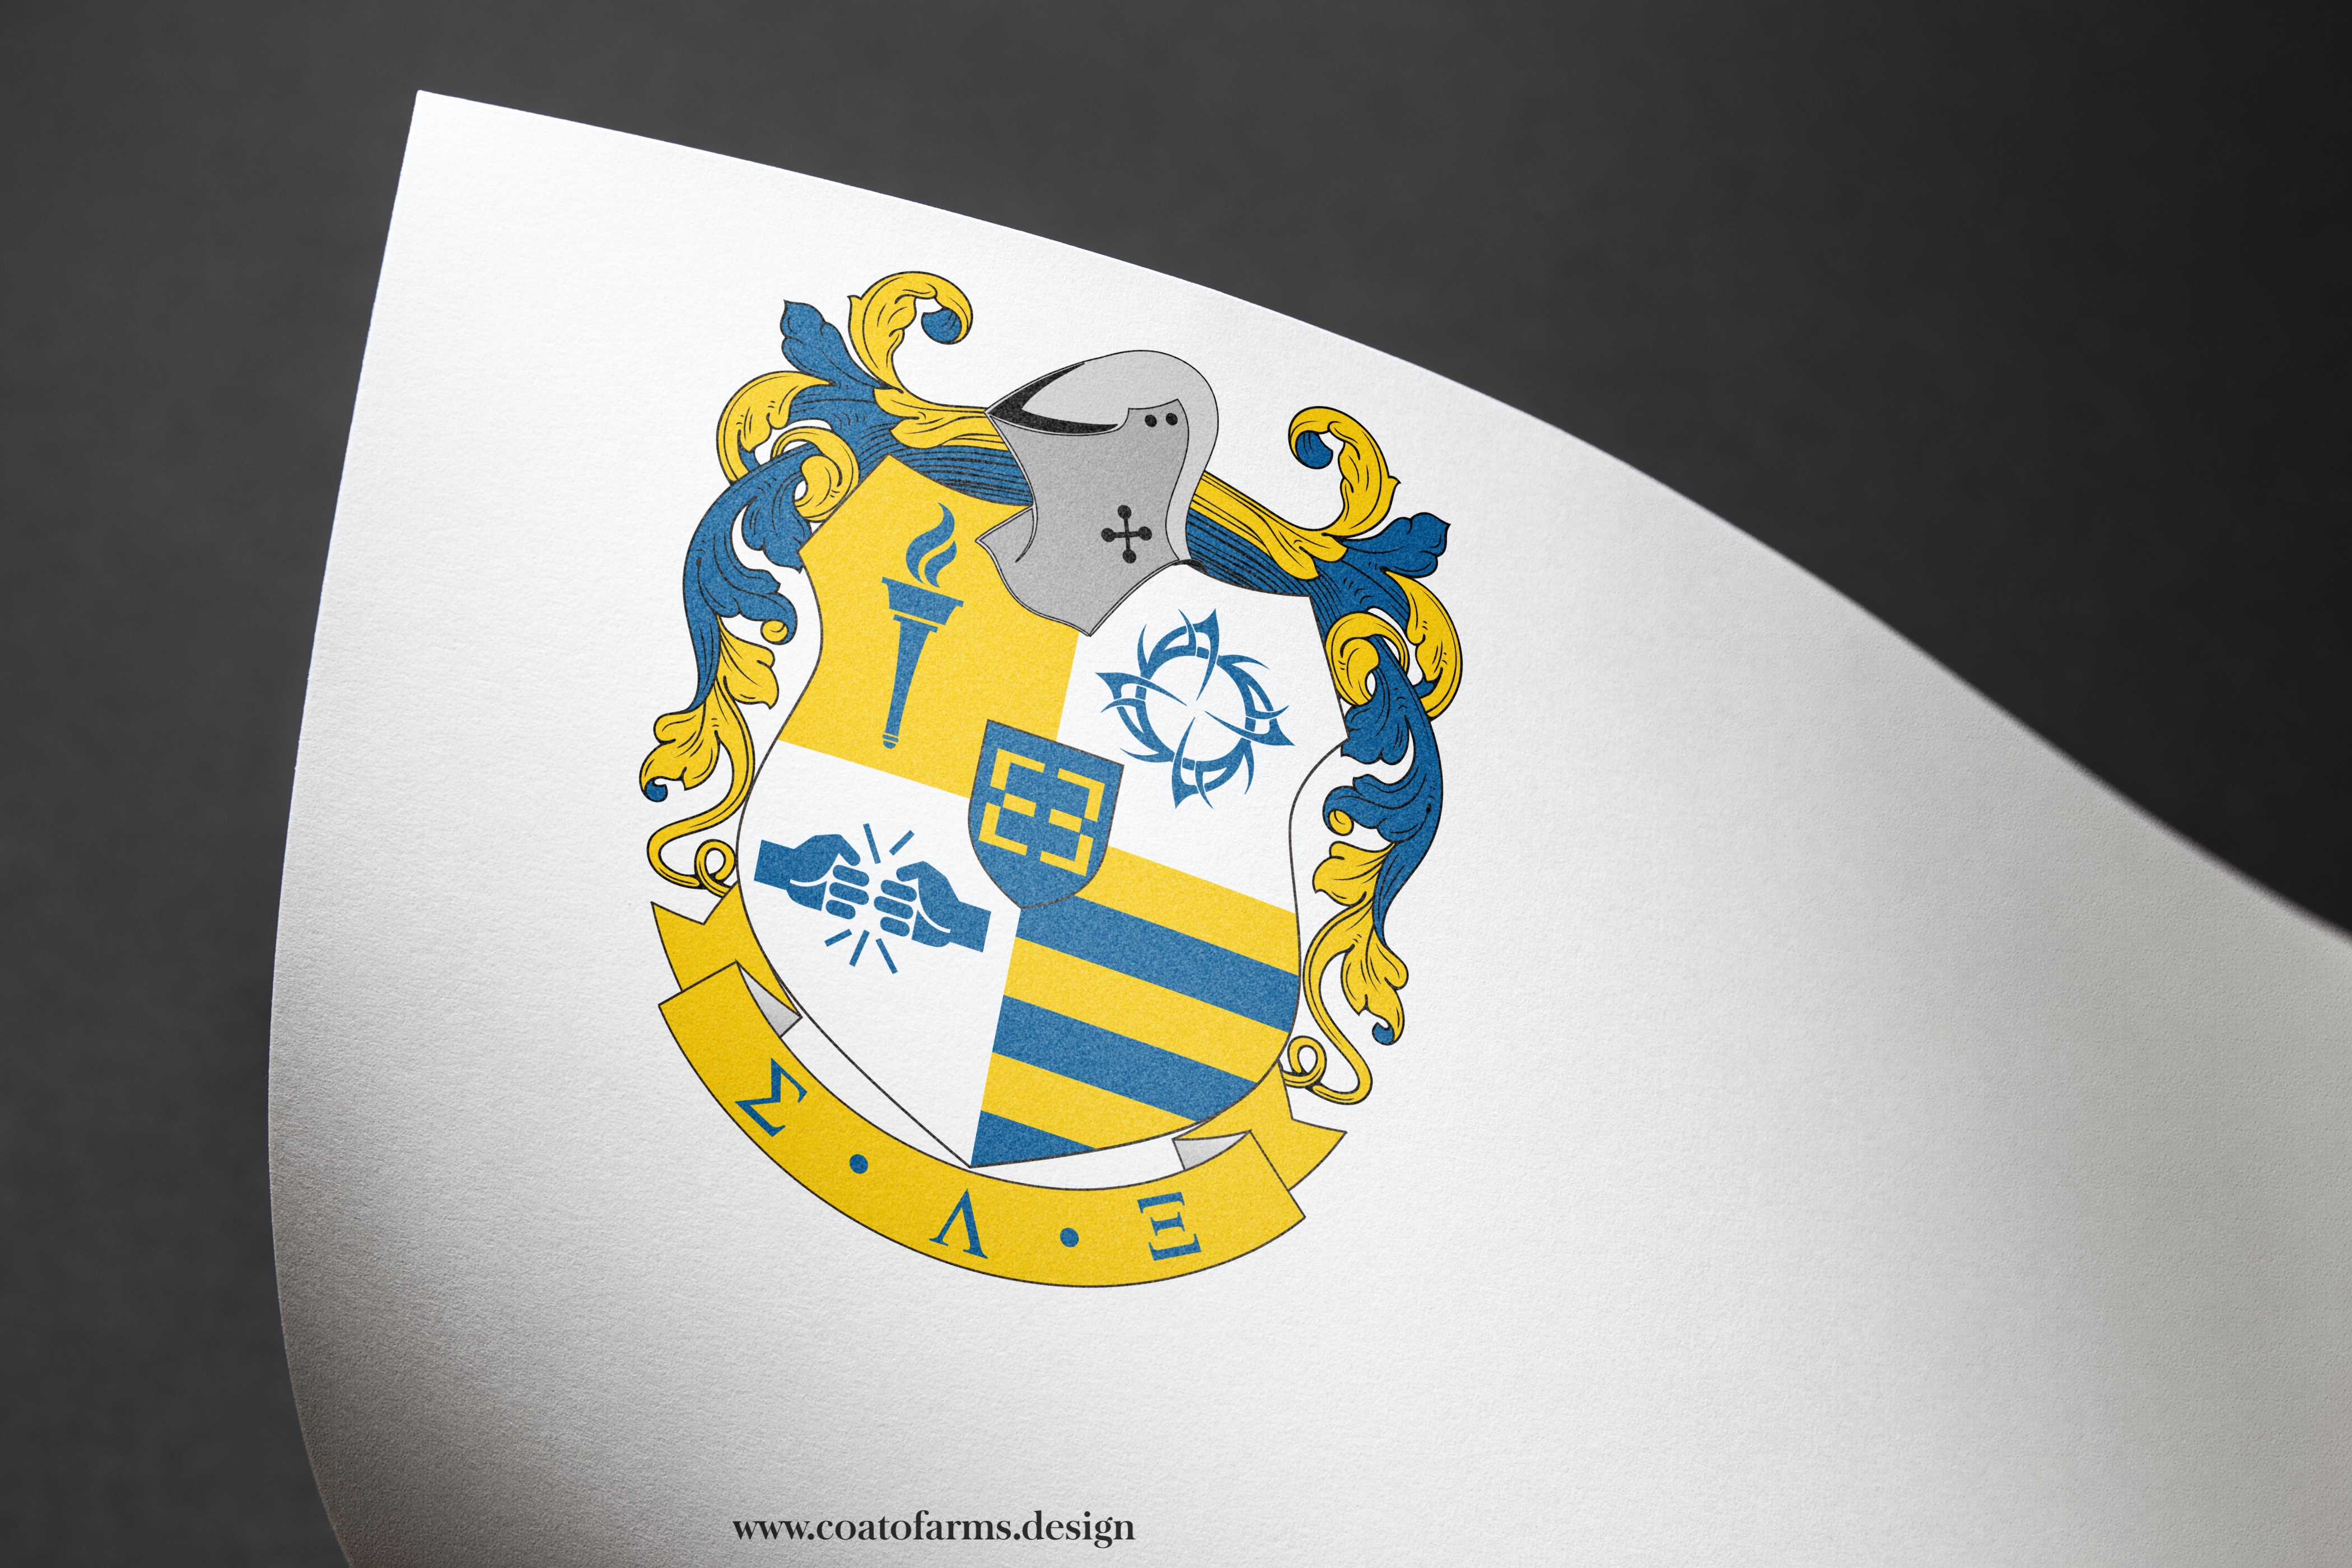 Modern coat of arms (emblem) I designed for a Kappa Xi Lambda fraternity from the USA